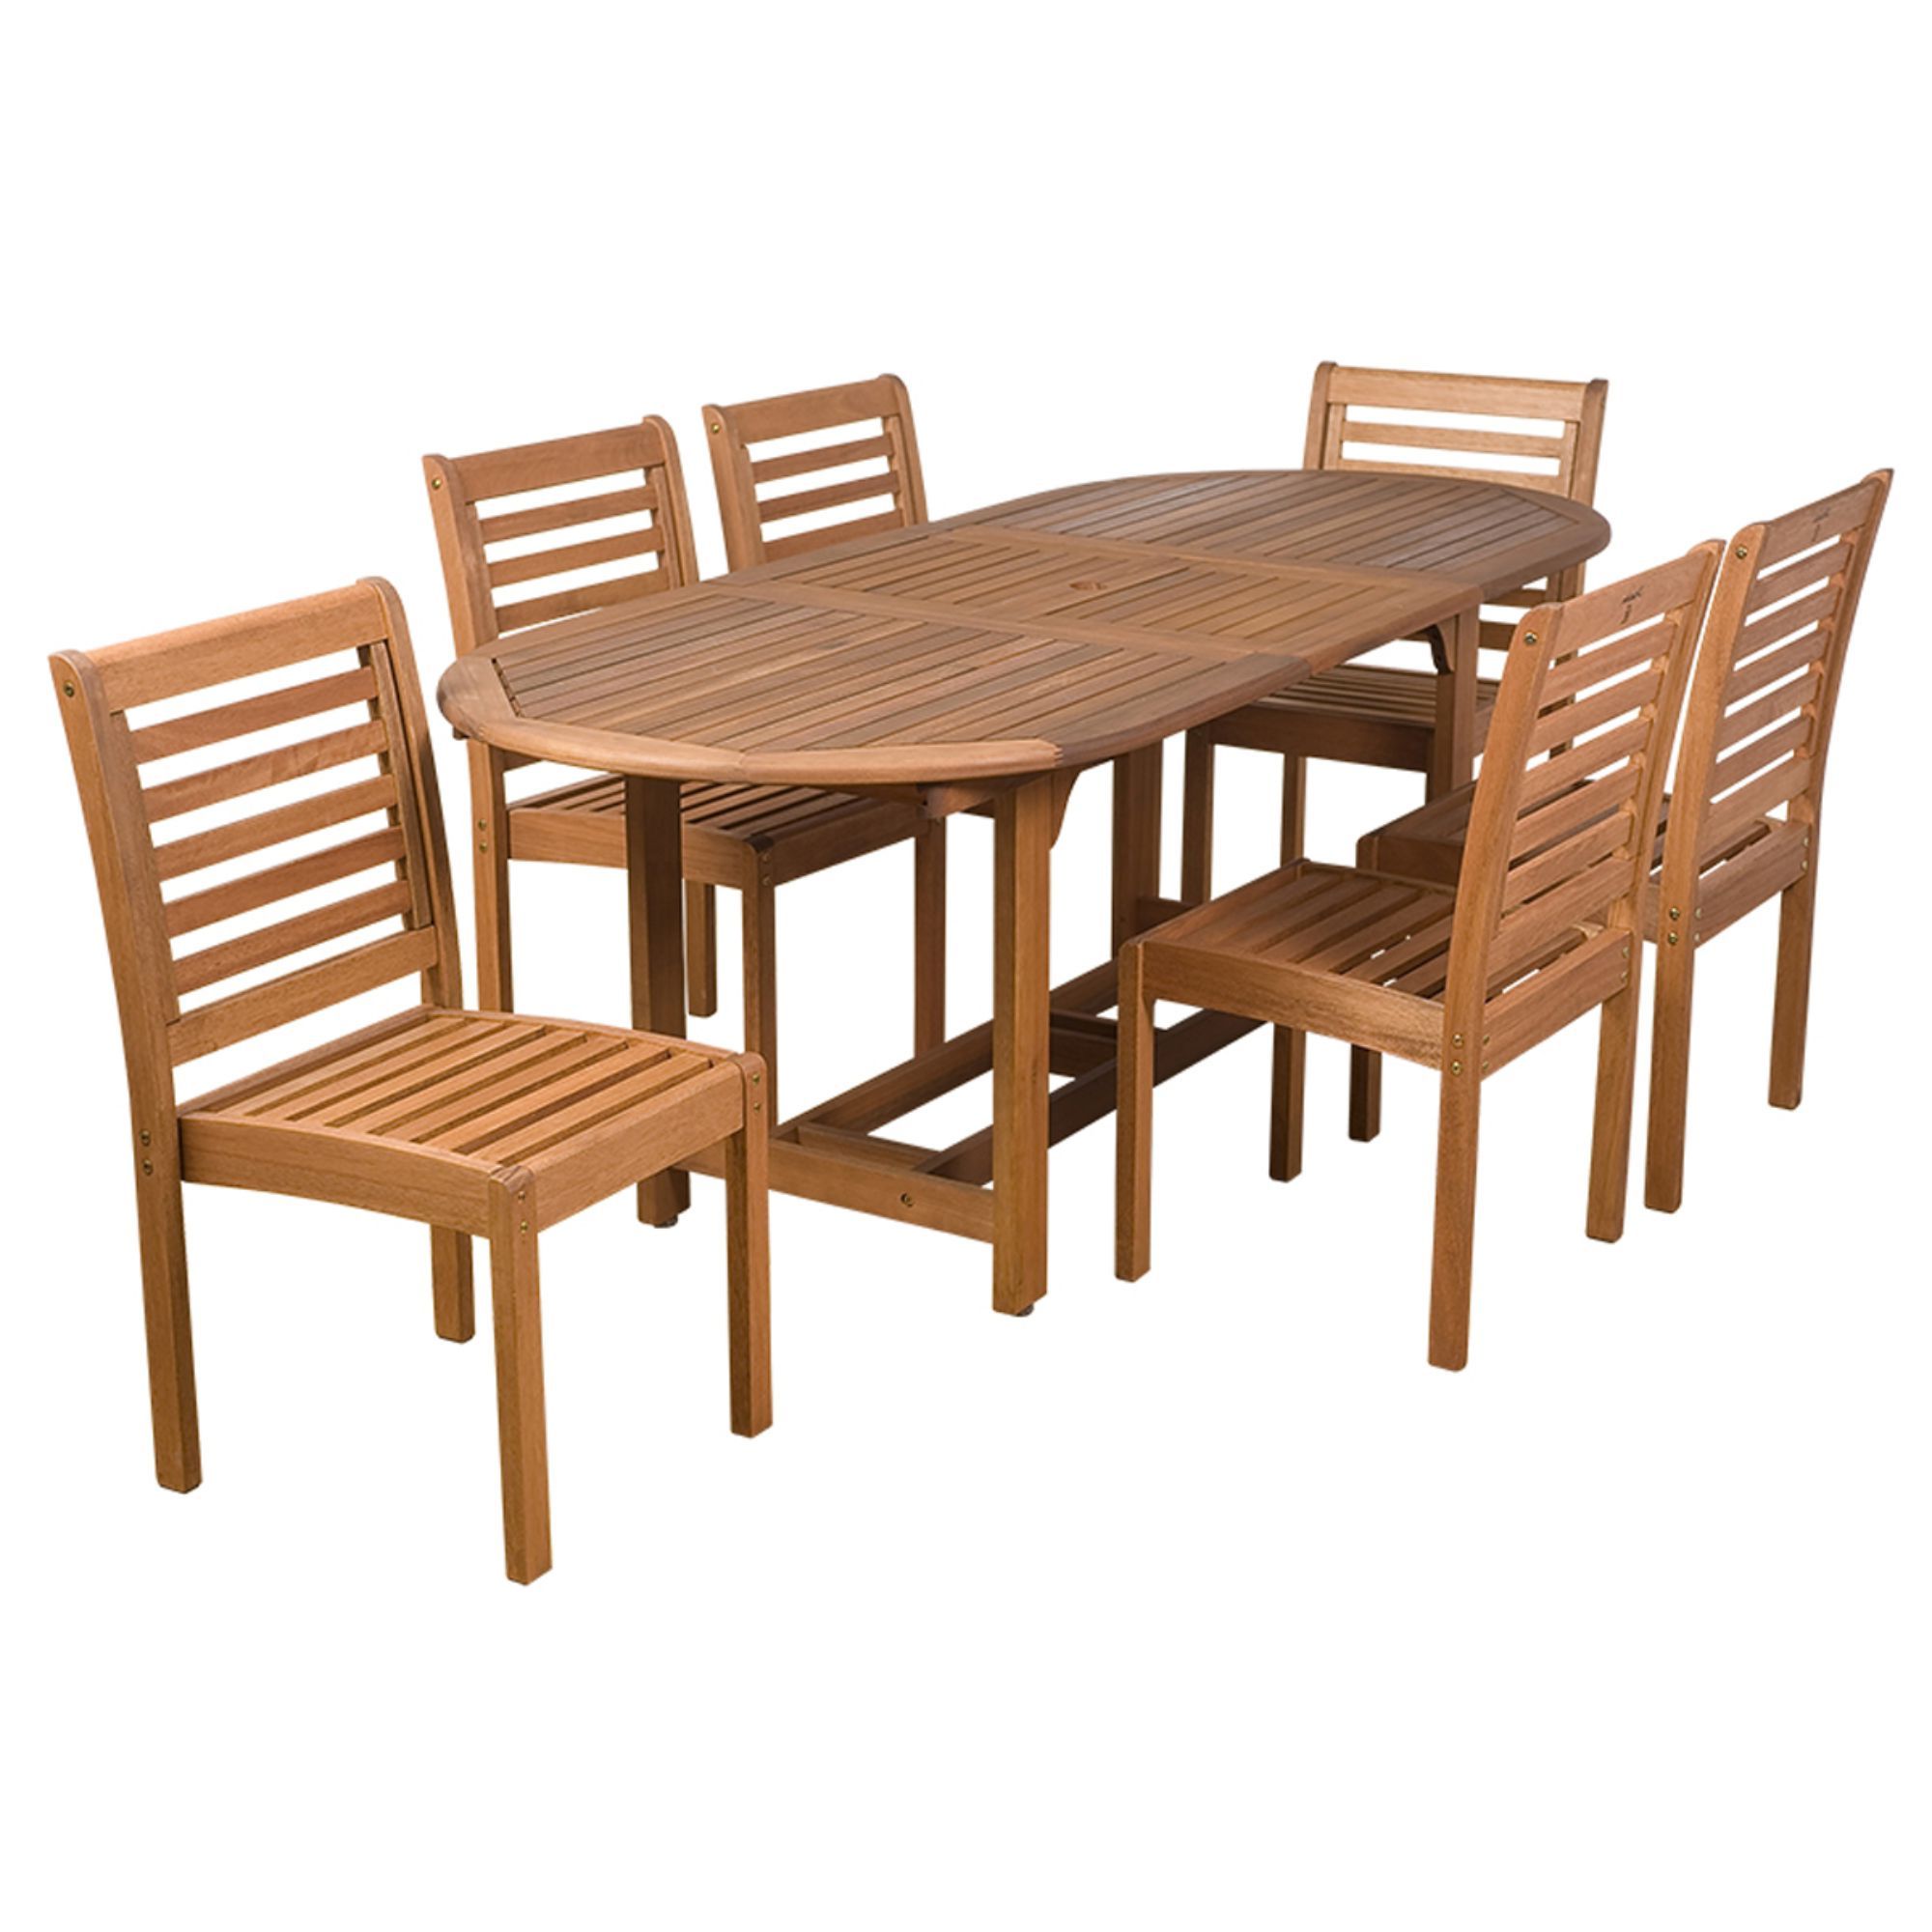 7 Piece Brown Eucalyptus Armless Oval Extendable Patio Dining Set 35 Throughout Recent Oval 7 Piece Outdoor Patio Dining Sets (View 14 of 15)